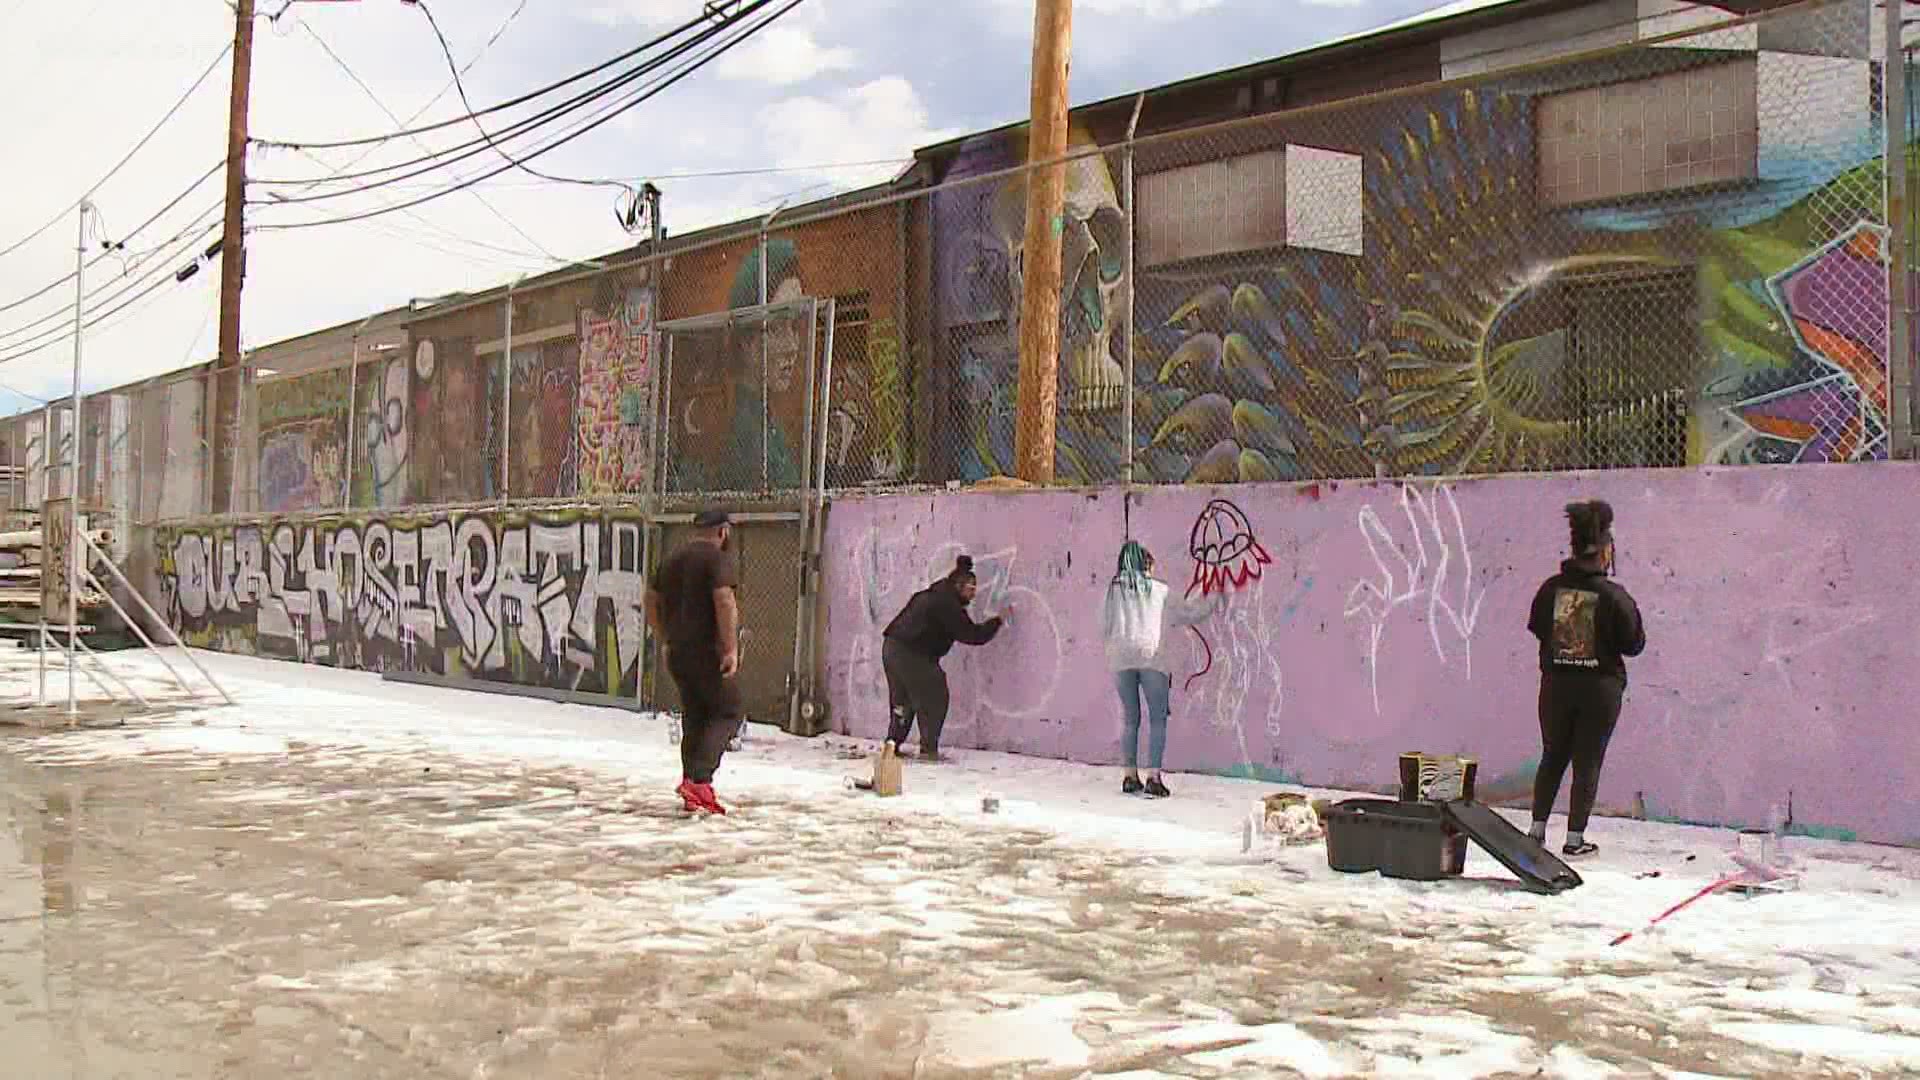 Murals done by local Black artists are starting to go up on loading docks near 29th Street and Blake Street in downtown Denver.